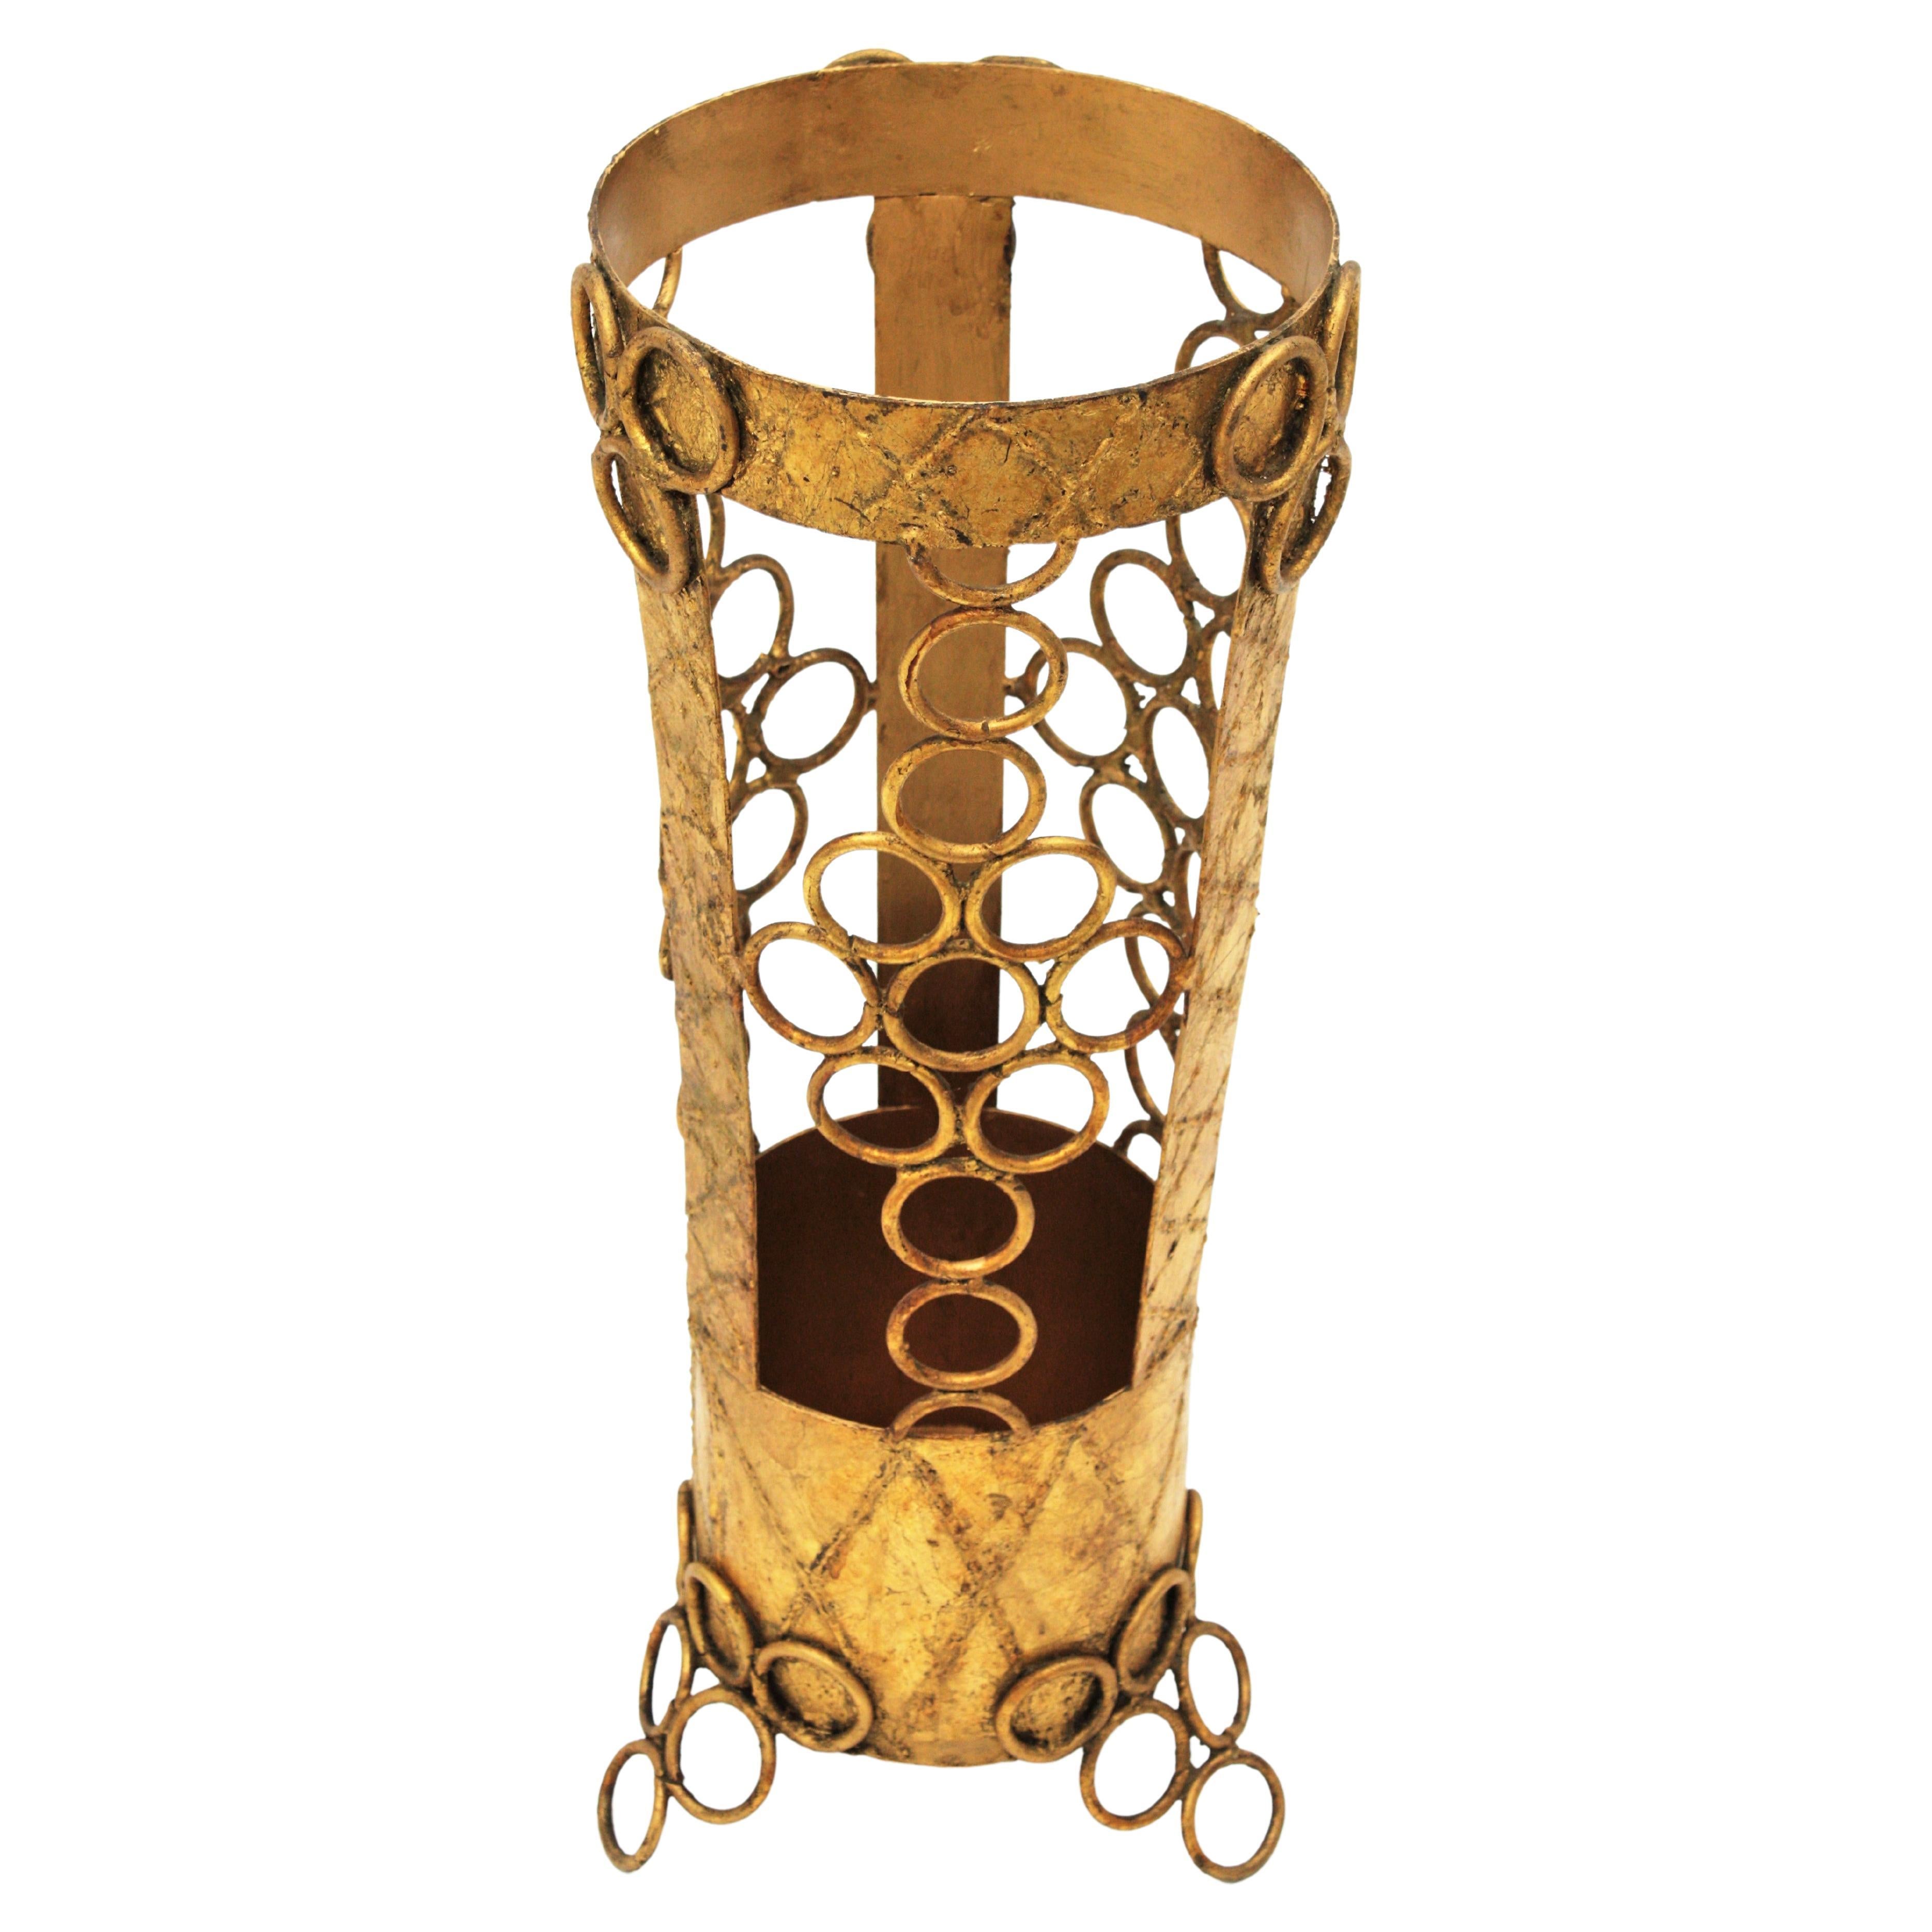 Hand-forged iron umbrella stand, Spain, 1950s.
One of a kind Brutalist style hand-hammered round umbrella stand with circles decoration and gold leaf gilt finishing. 
This artisan umbrella Stand is made from wrought iron, it has hammered rhombus